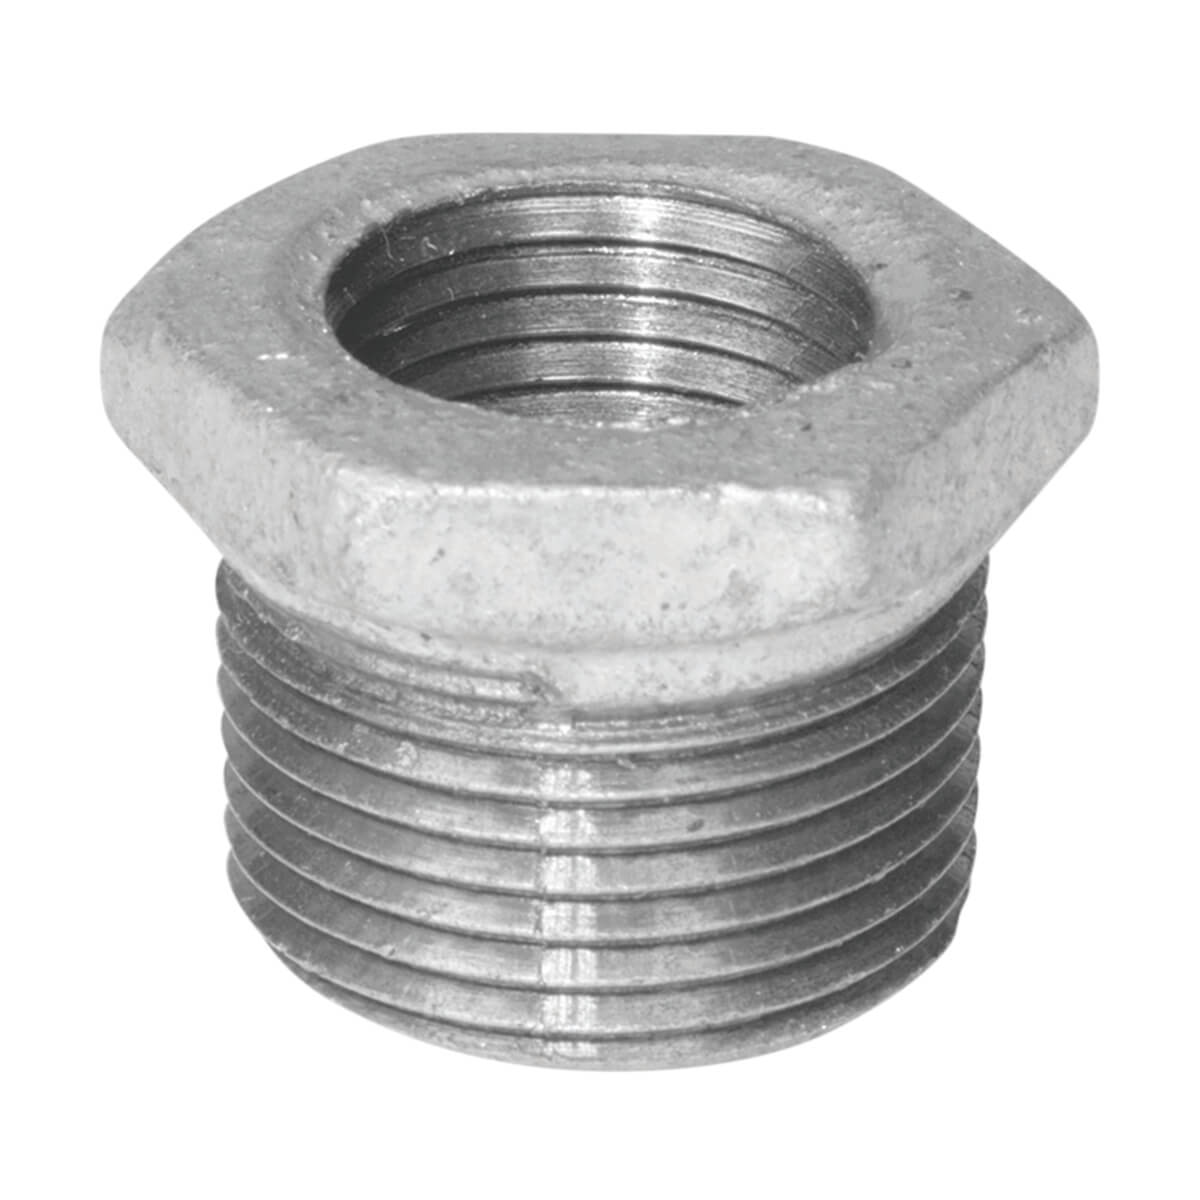 Fitting Galvanized Iron Hex Bushing - 3/4-in x 3/8-in